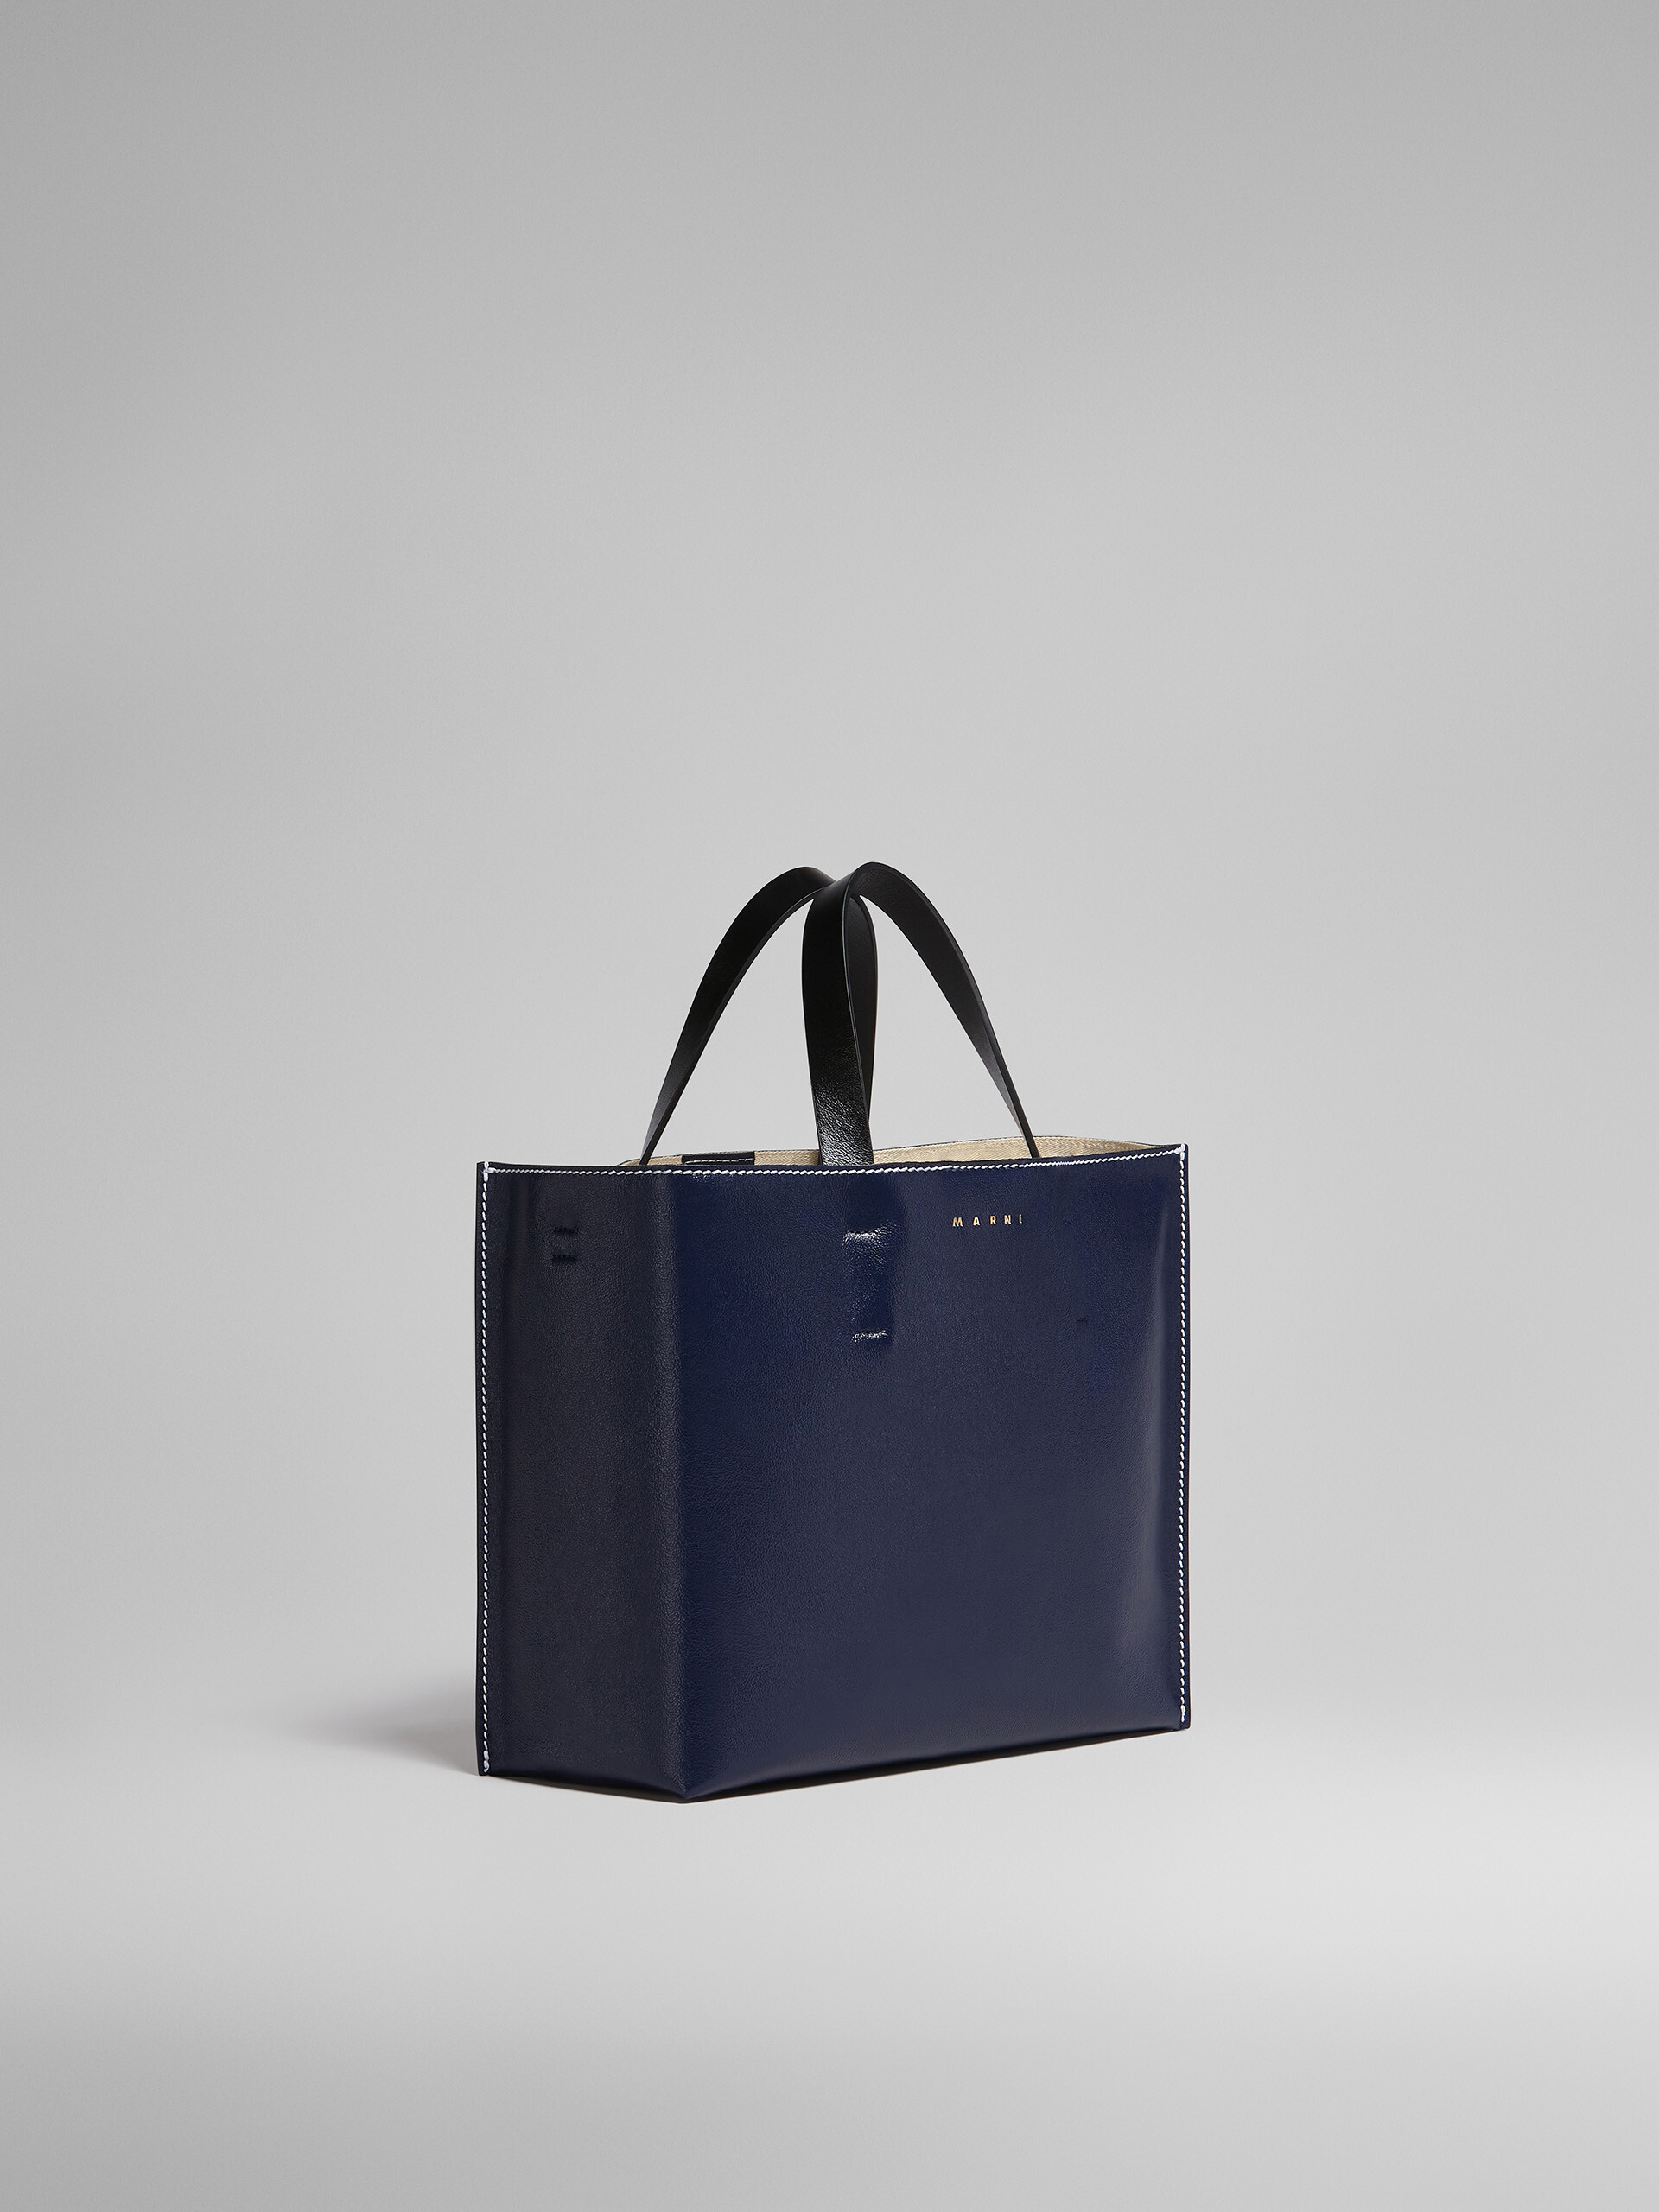 MUSEO SOFT bag in blue and grey leather - Shopping Bags - Image 6